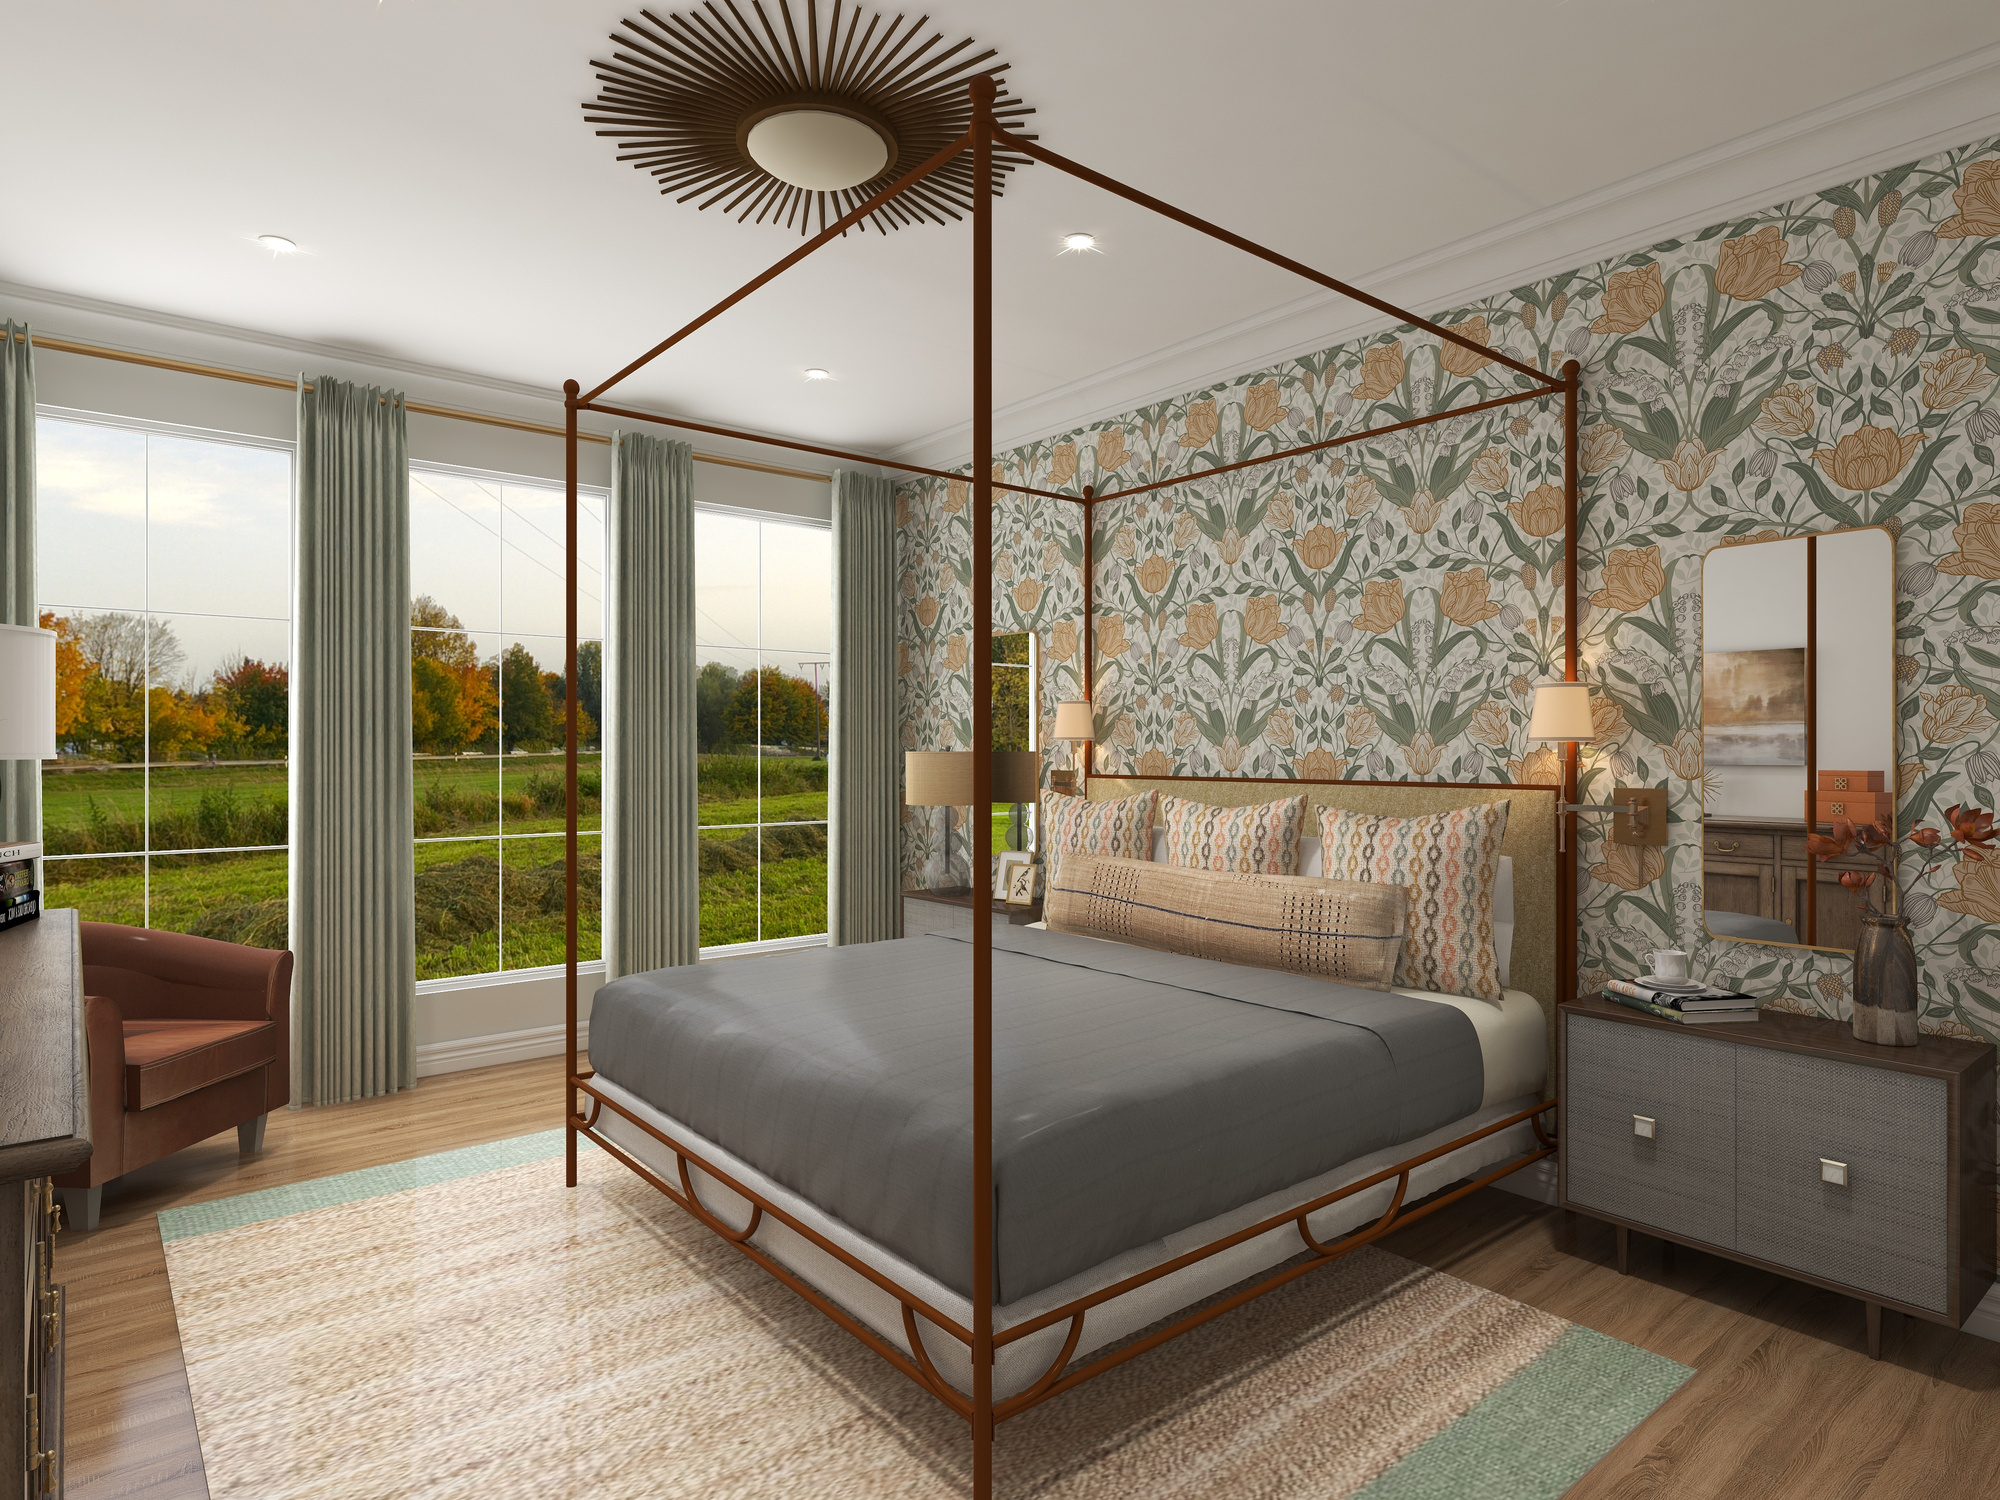 A warm and inviting bedroom with a four poster bed, intriguing wallpaper, and large picturesque windows.